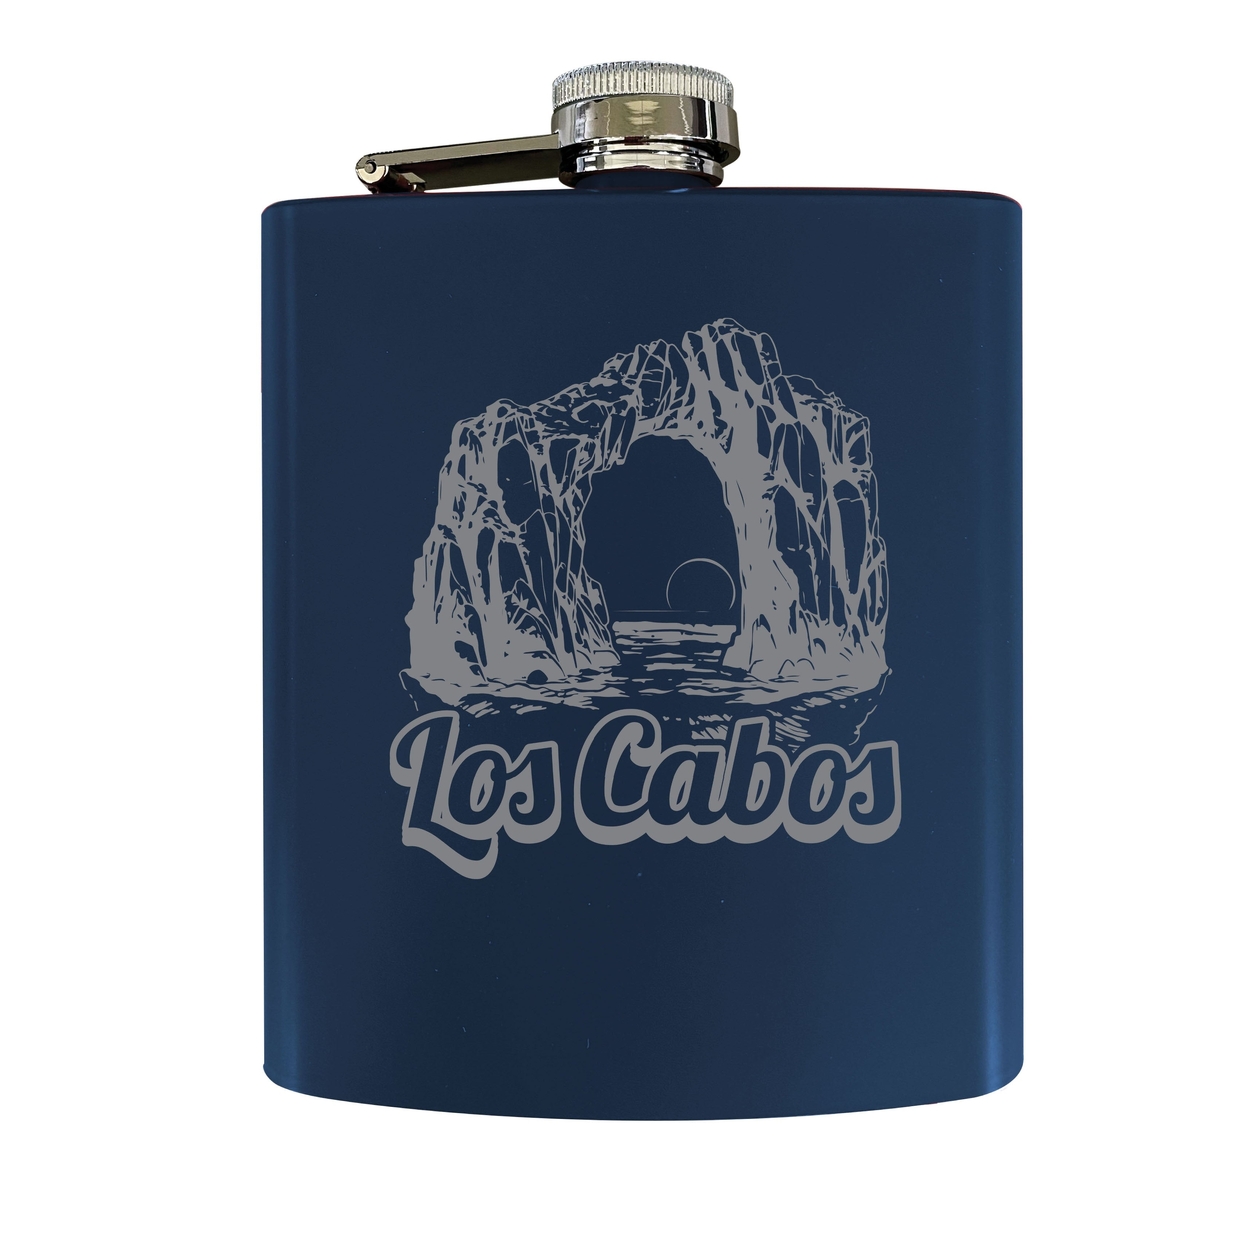 Los Cabos Mexico Souvenir 7 Oz Engraved Steel Flask Matte Finish - Navy,,4-Pack